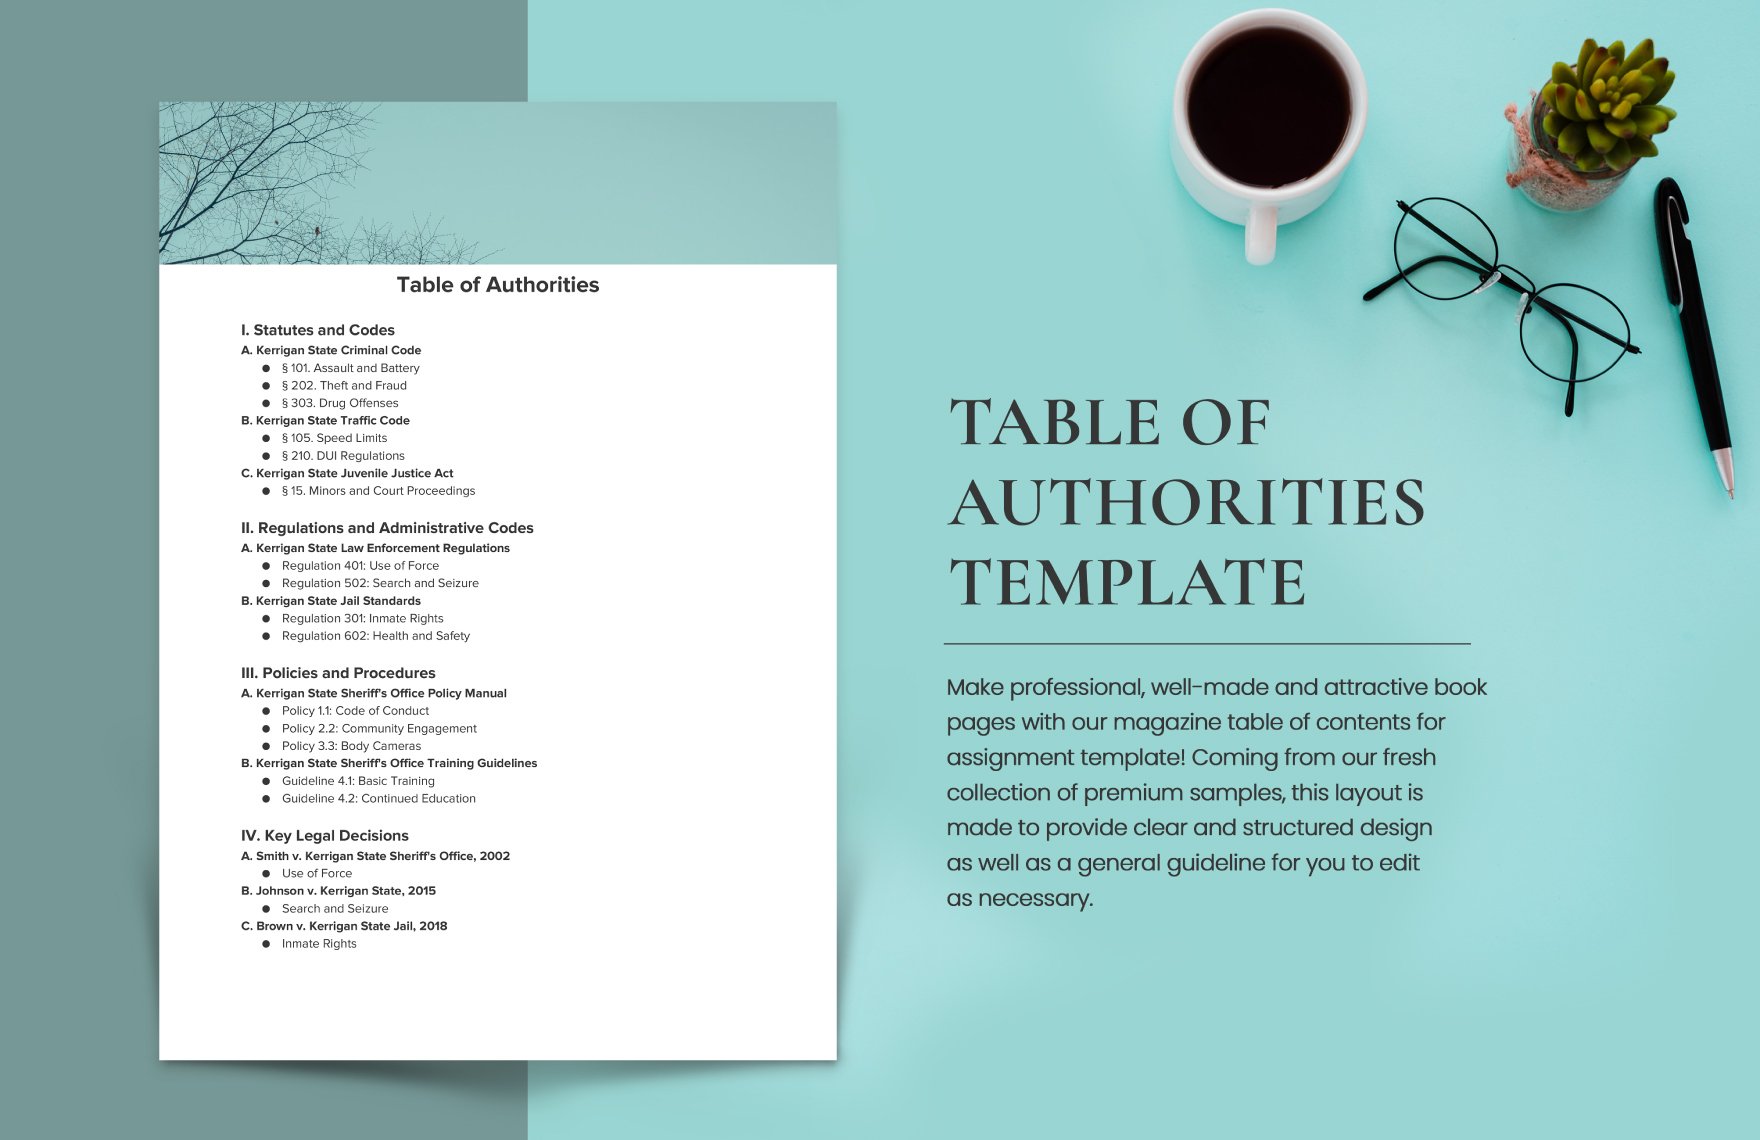 Table of Authorities Template